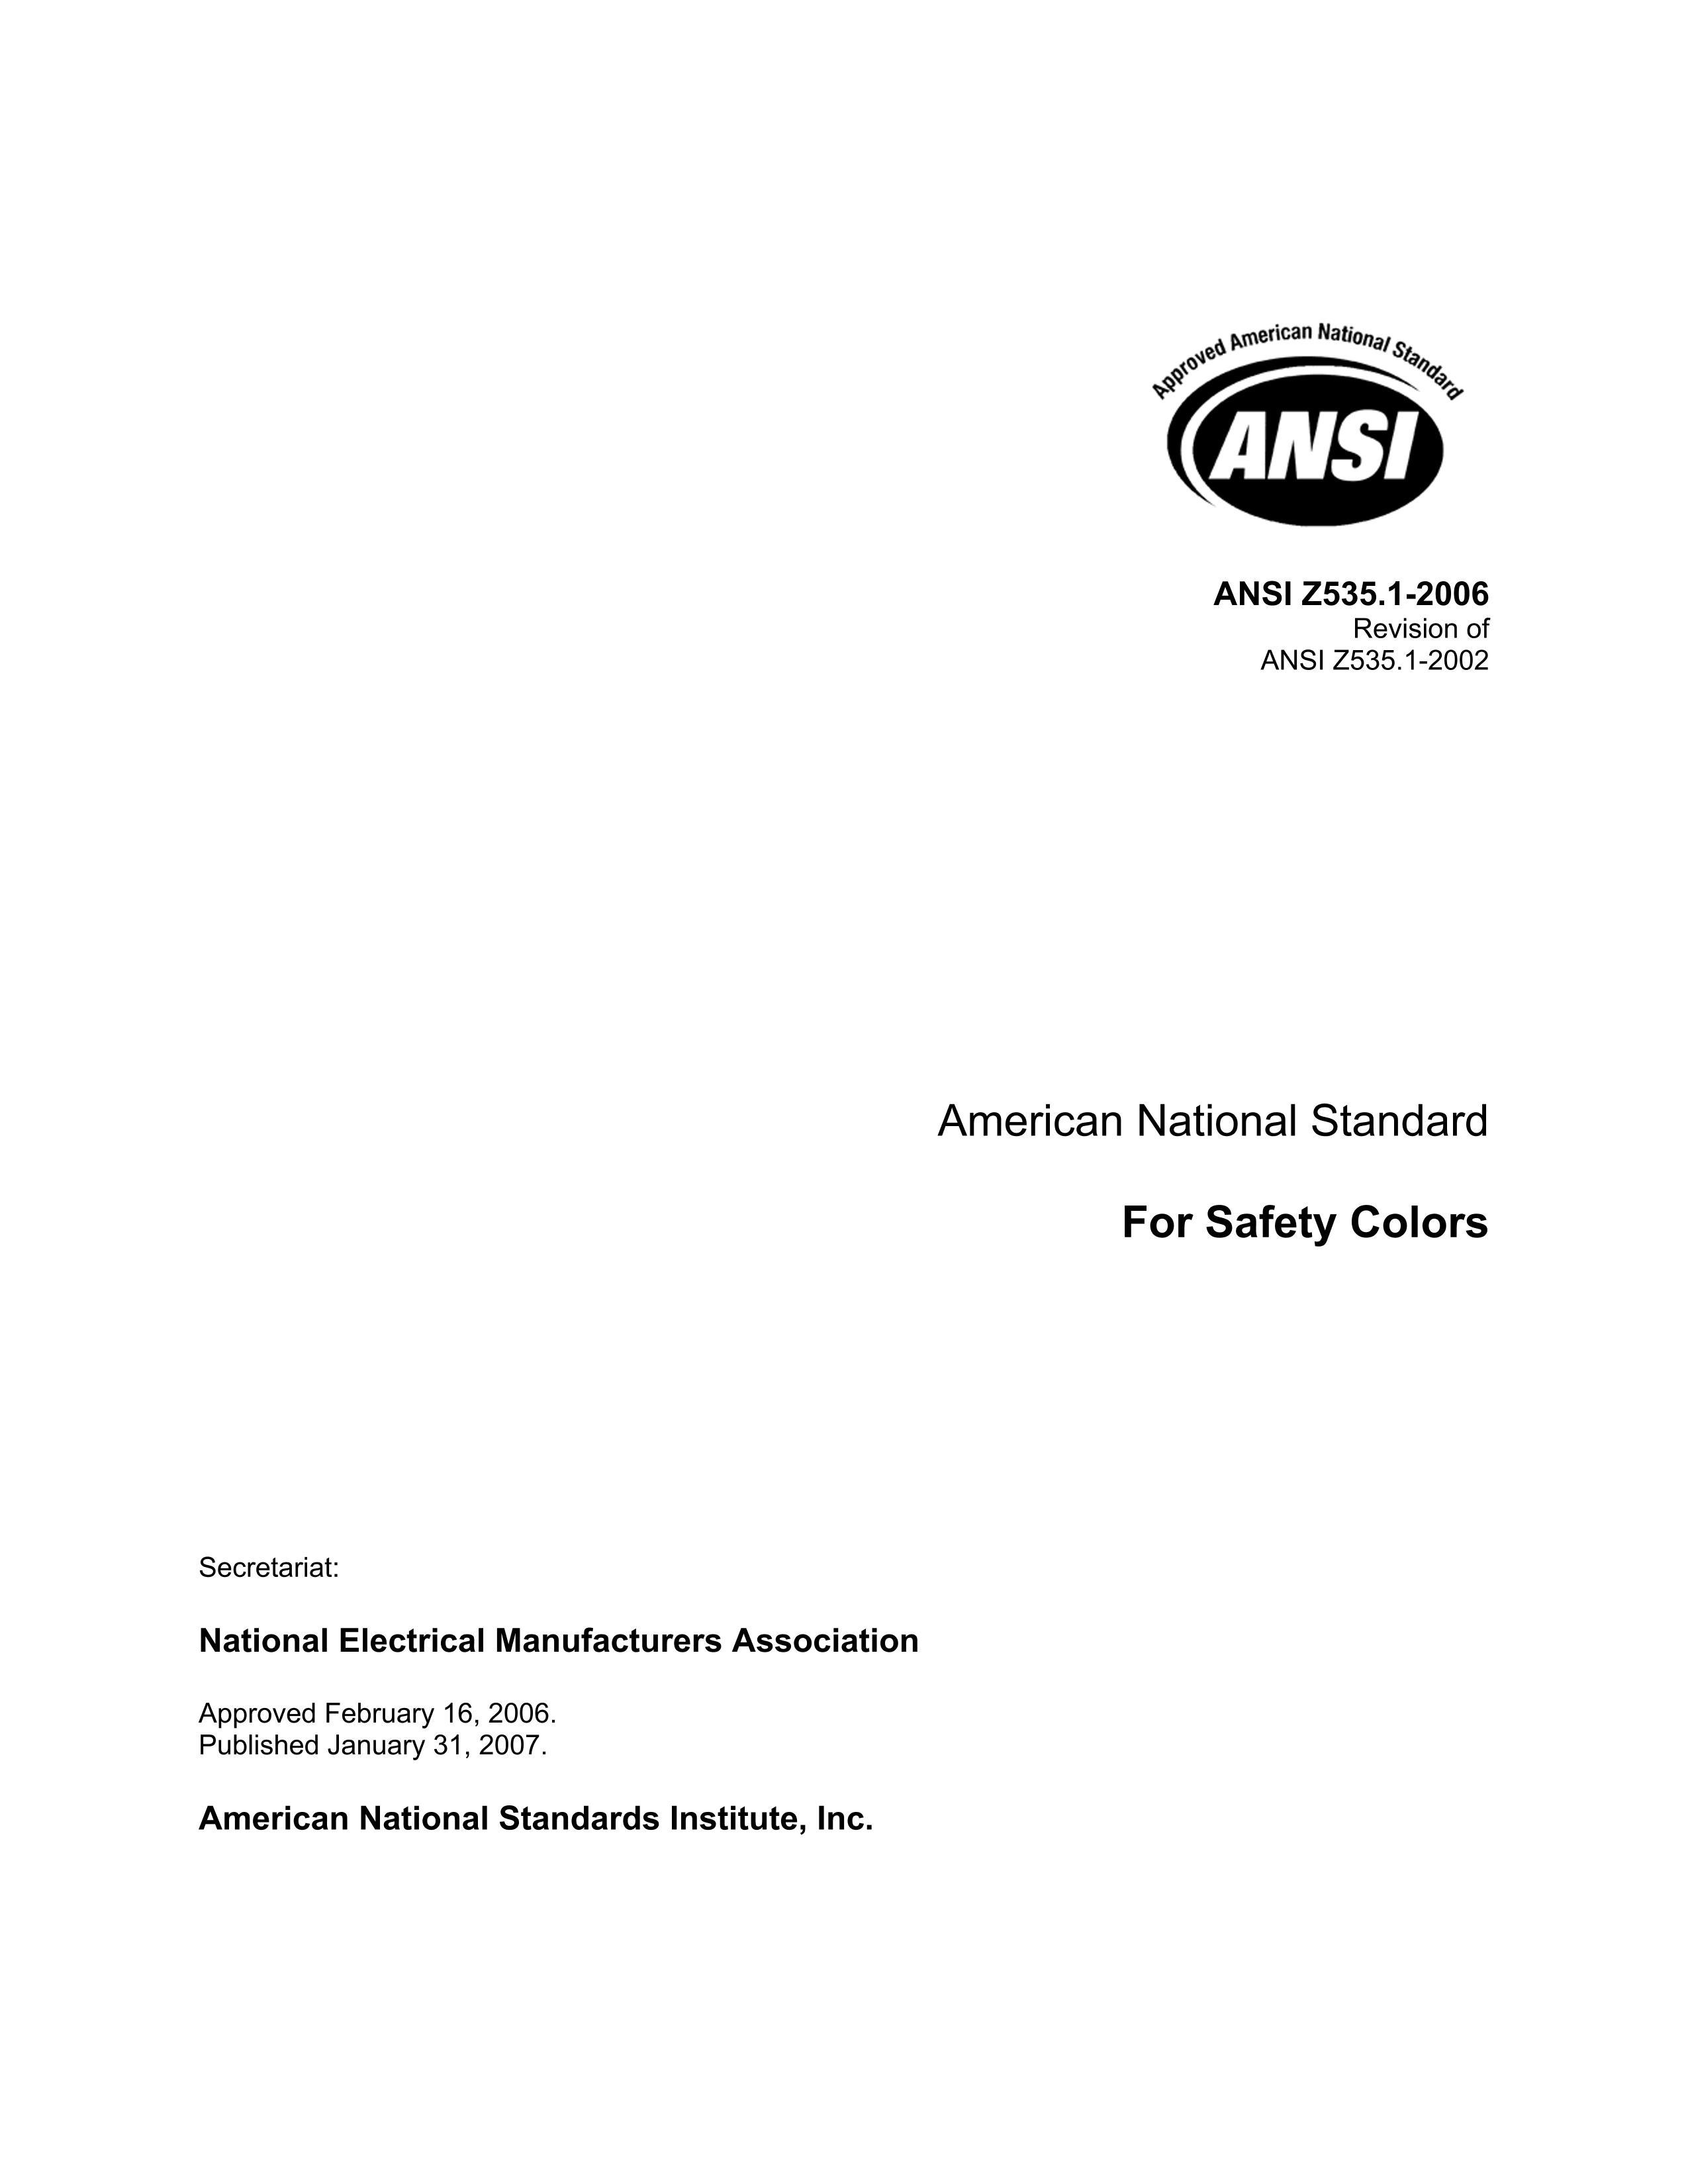 ANSI Z535.1-2006 American National Standard for Safety Colors.pdf3ҳ